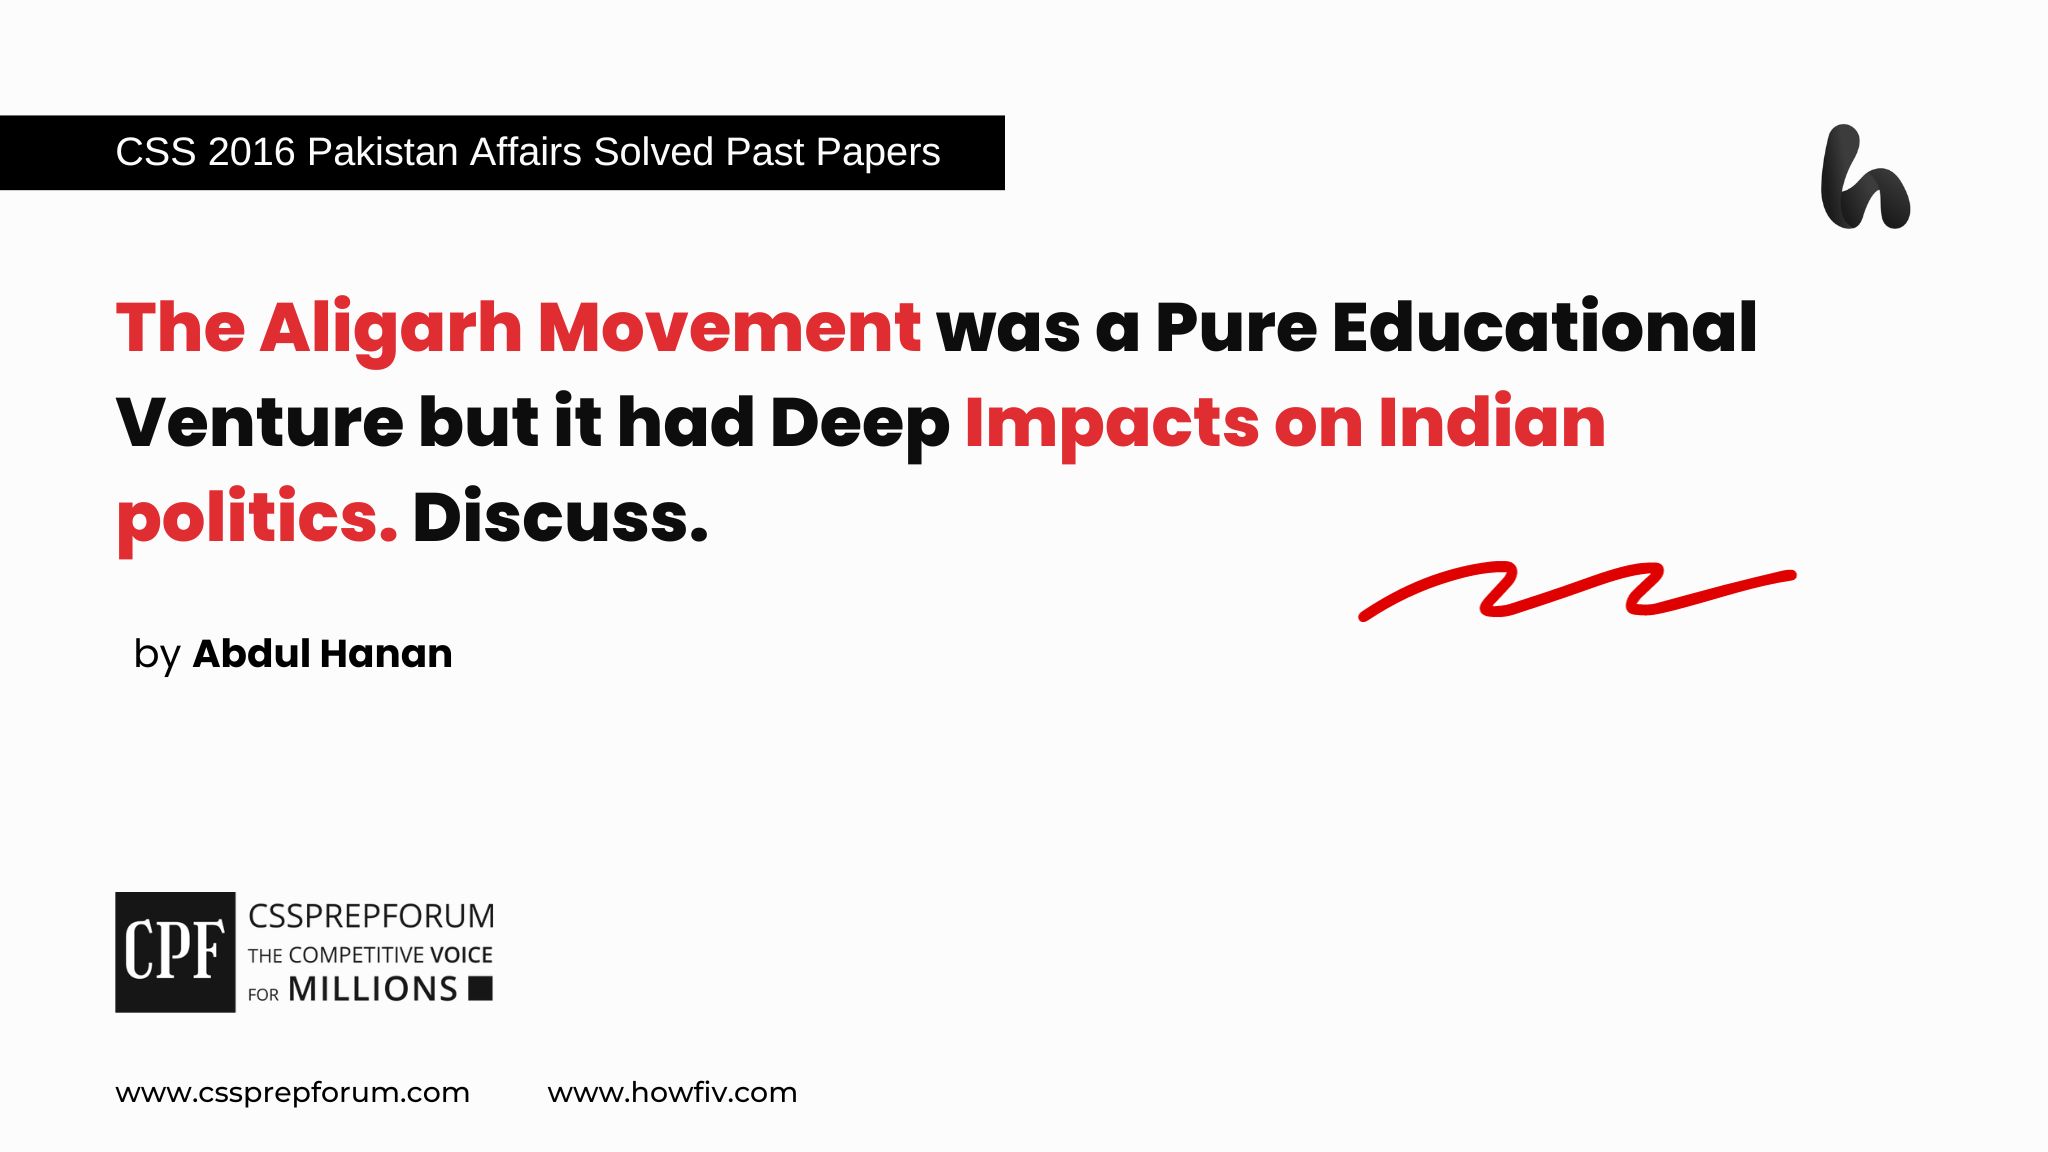 The Aligarh Movement was a Pure Educational Venture but it had Deep Impacts on Indian politics. Discuss.